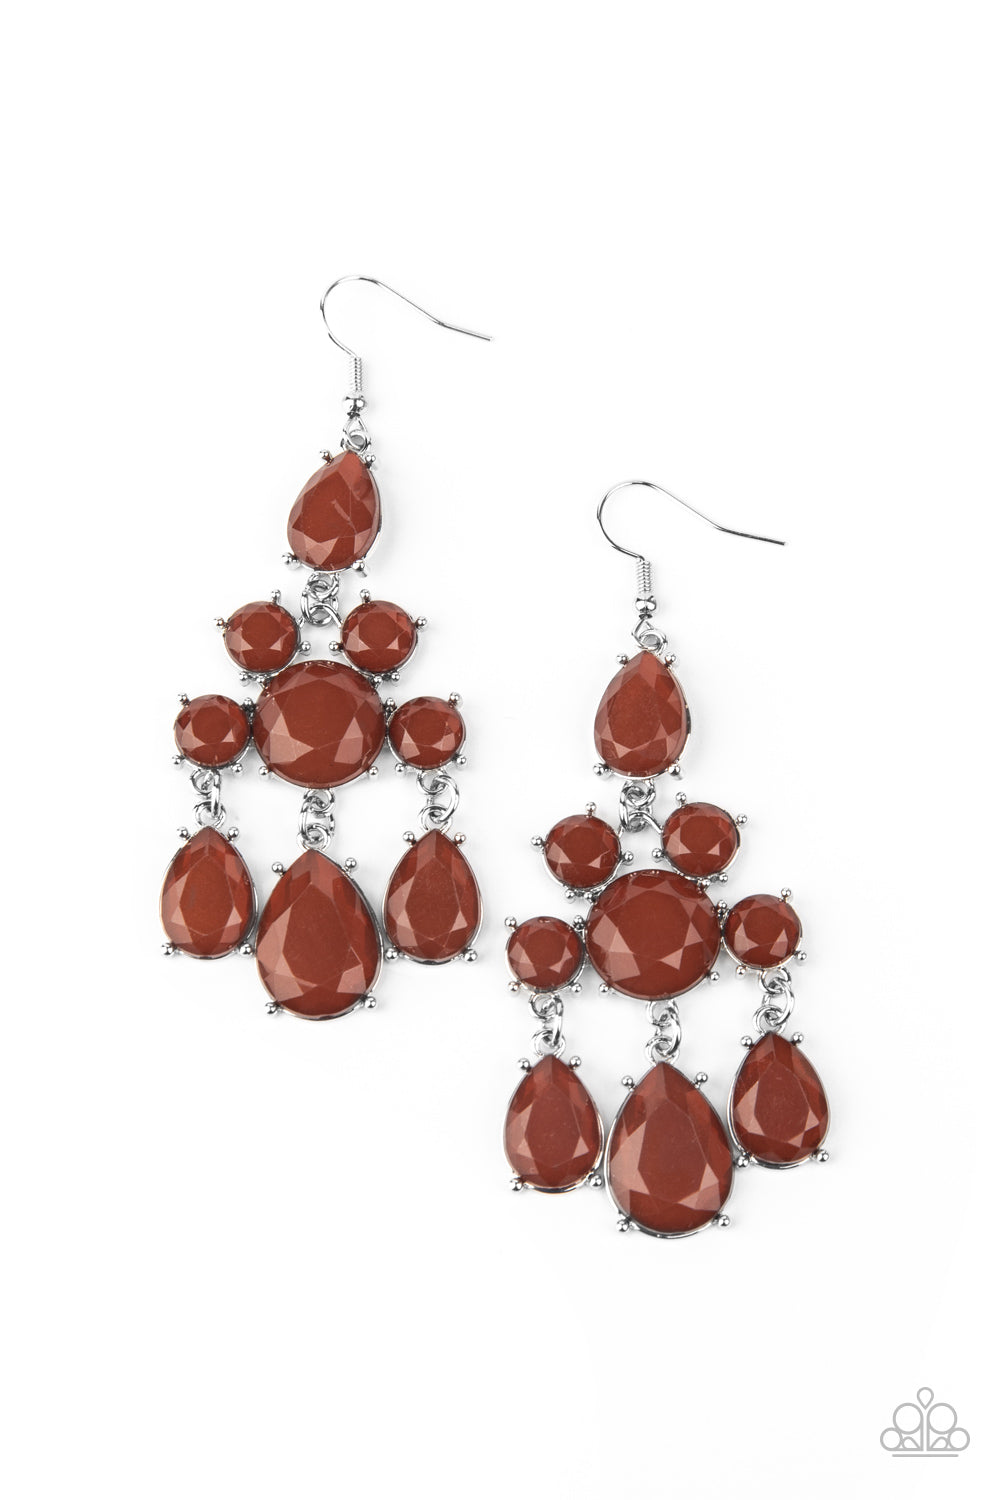 Paparazzi Accessories Afterglow Glamour - Brown Earrings - Lady T Accessories